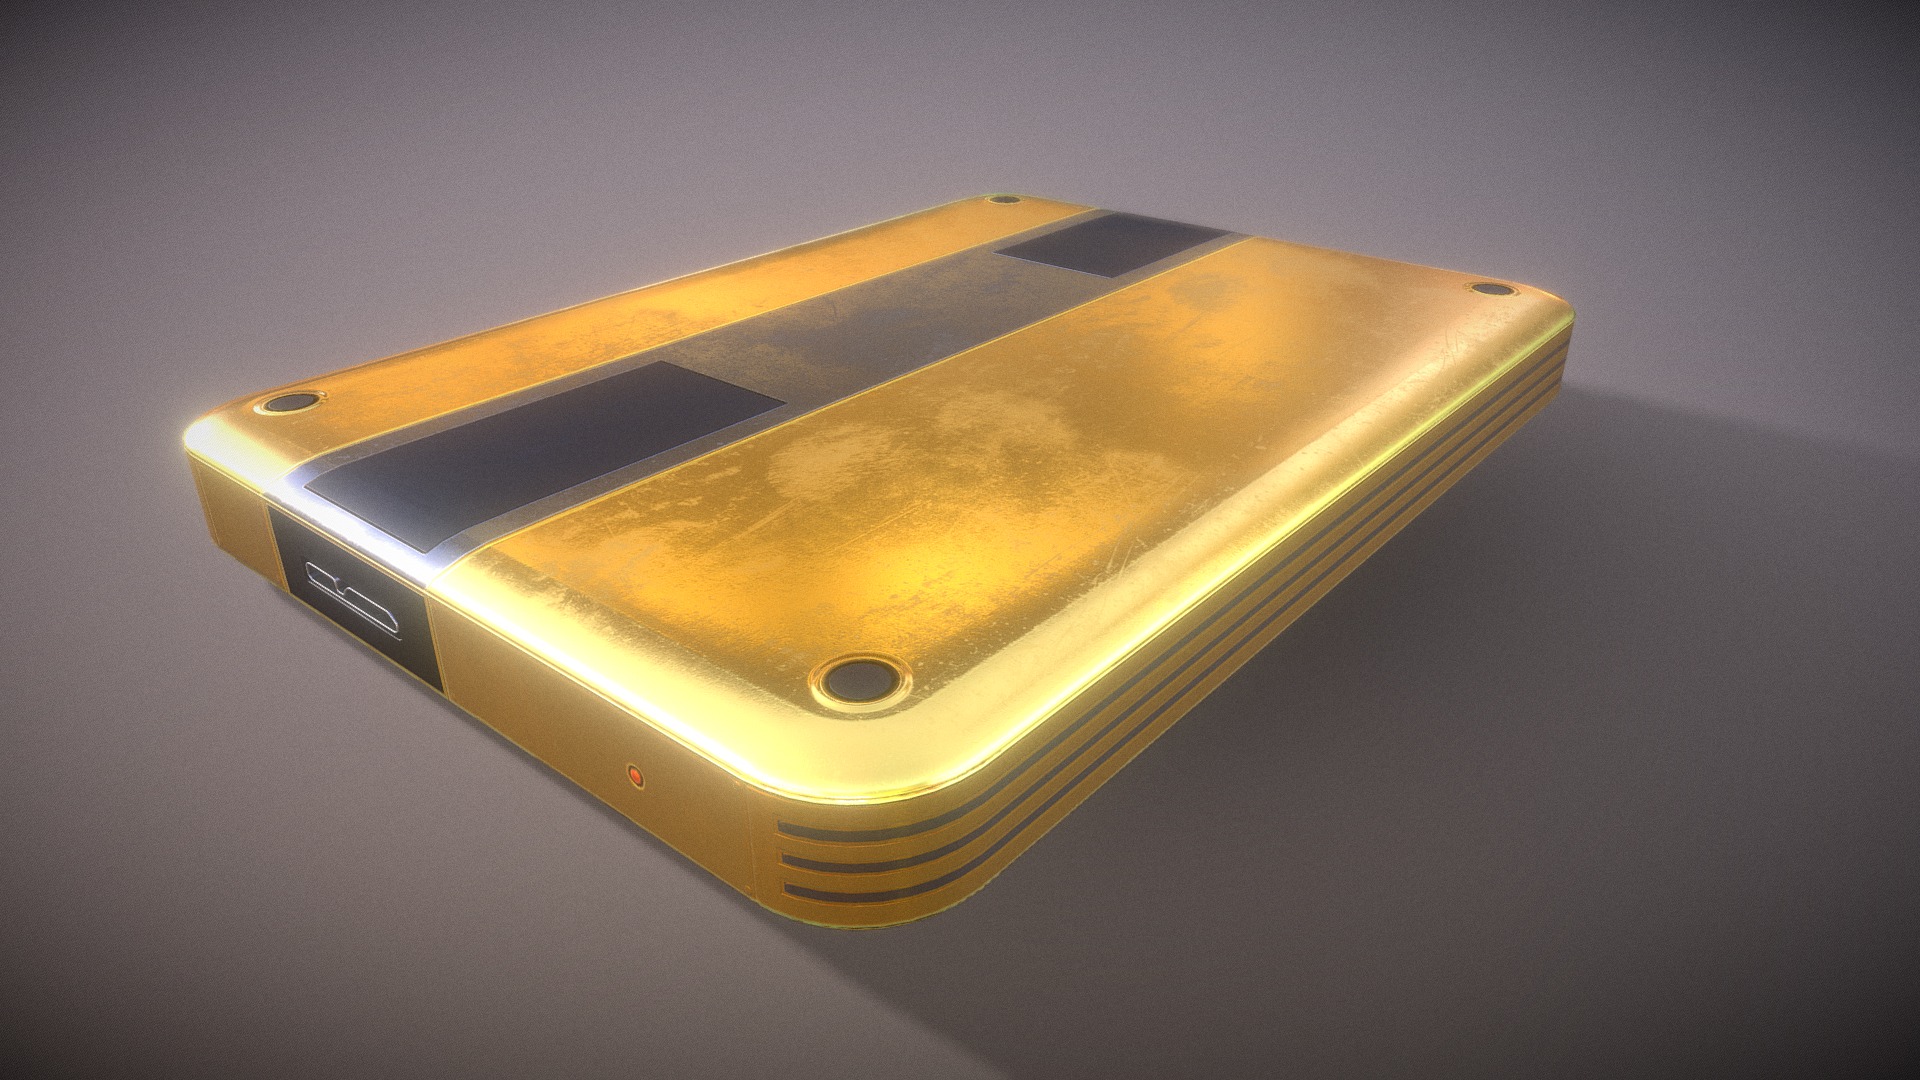 3D model External Hard Drive Low-Poly Gold Version - This is a 3D model of the External Hard Drive Low-Poly Gold Version. The 3D model is about a yellow cell phone.